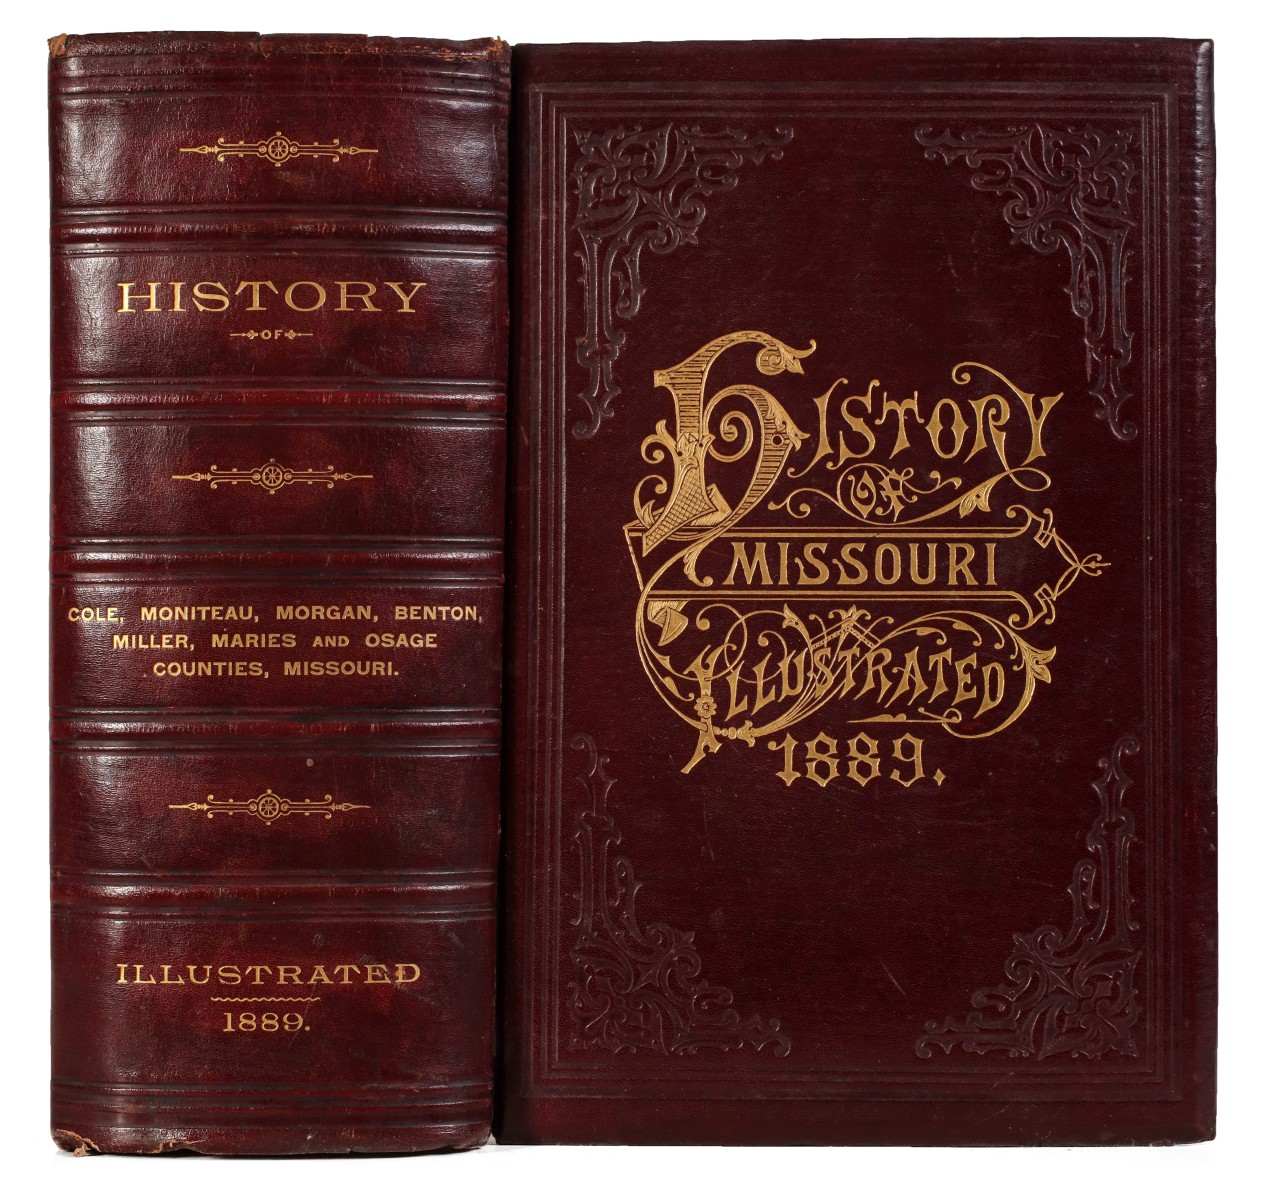 FULL LEATHER HISTORY OF MISSOURI (SEVEN COUNTIES) 1889